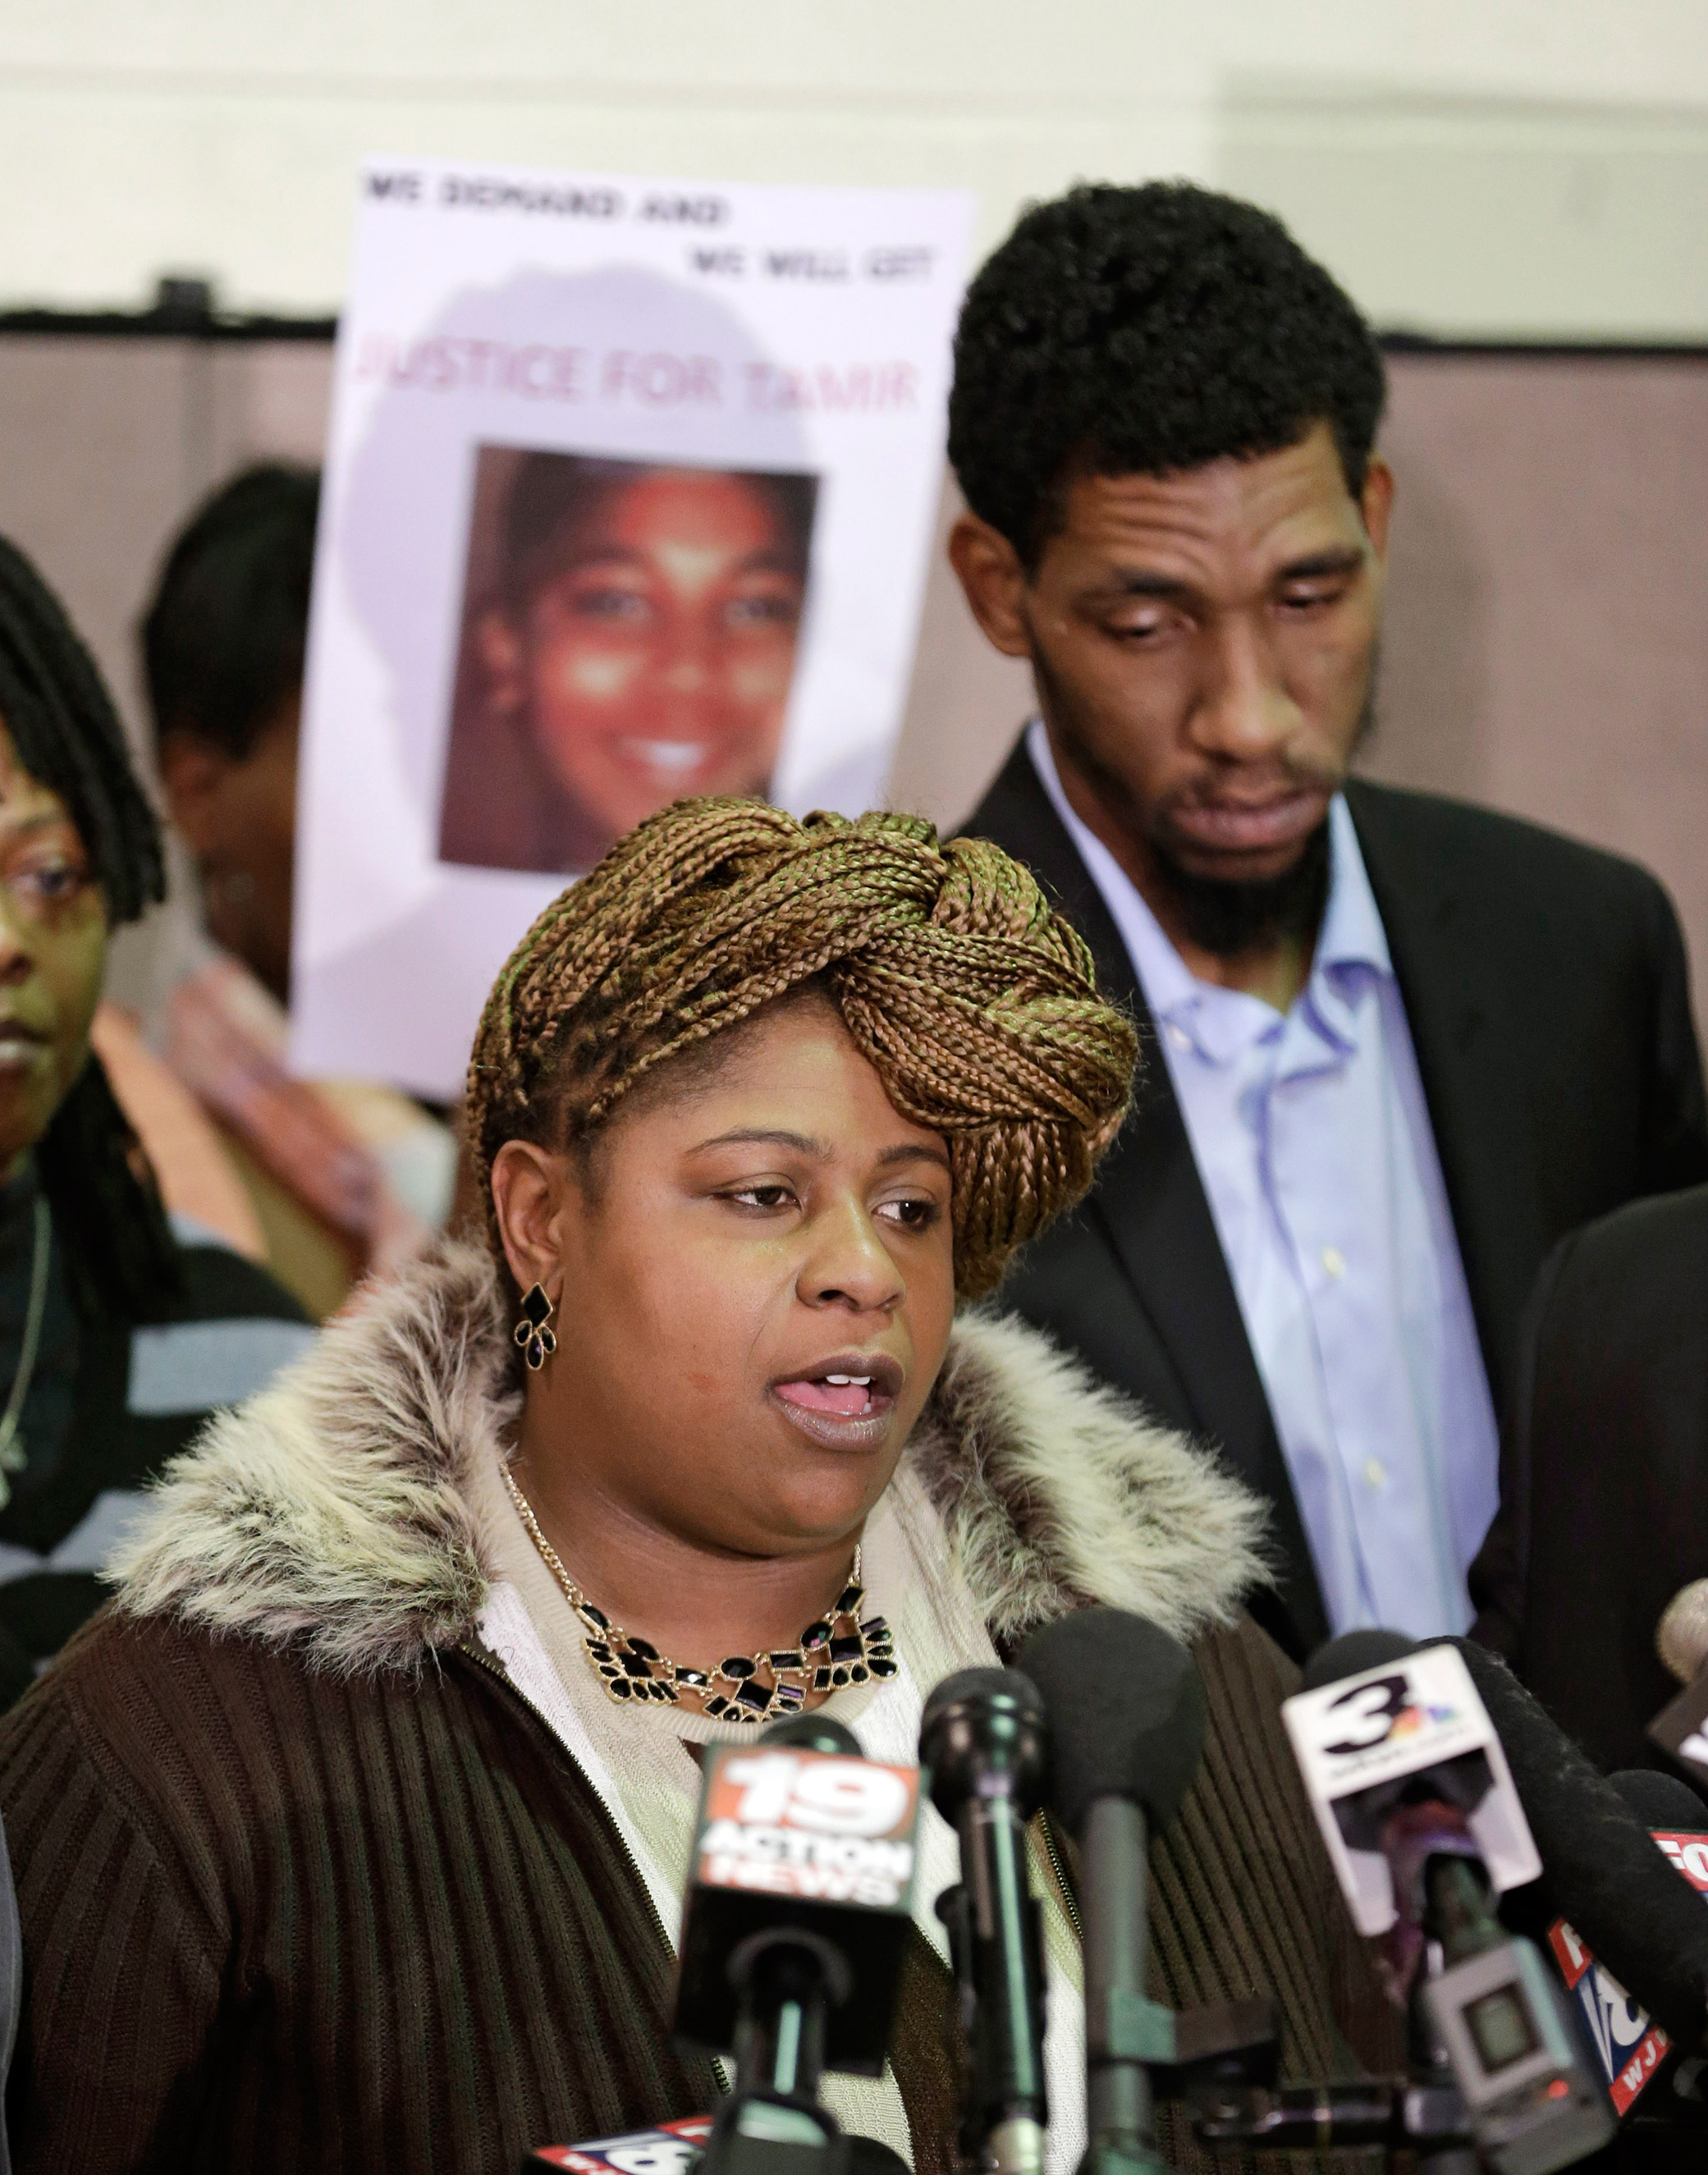 Samaria Rice, mother of Tamir, the 12-year-old boy who was fatally shot by a Cleveland police officer, speaks as Leonard Warner, Tamir's father, listens during a news conference in Cleveland, Ohio, Dec. 8, 2014.